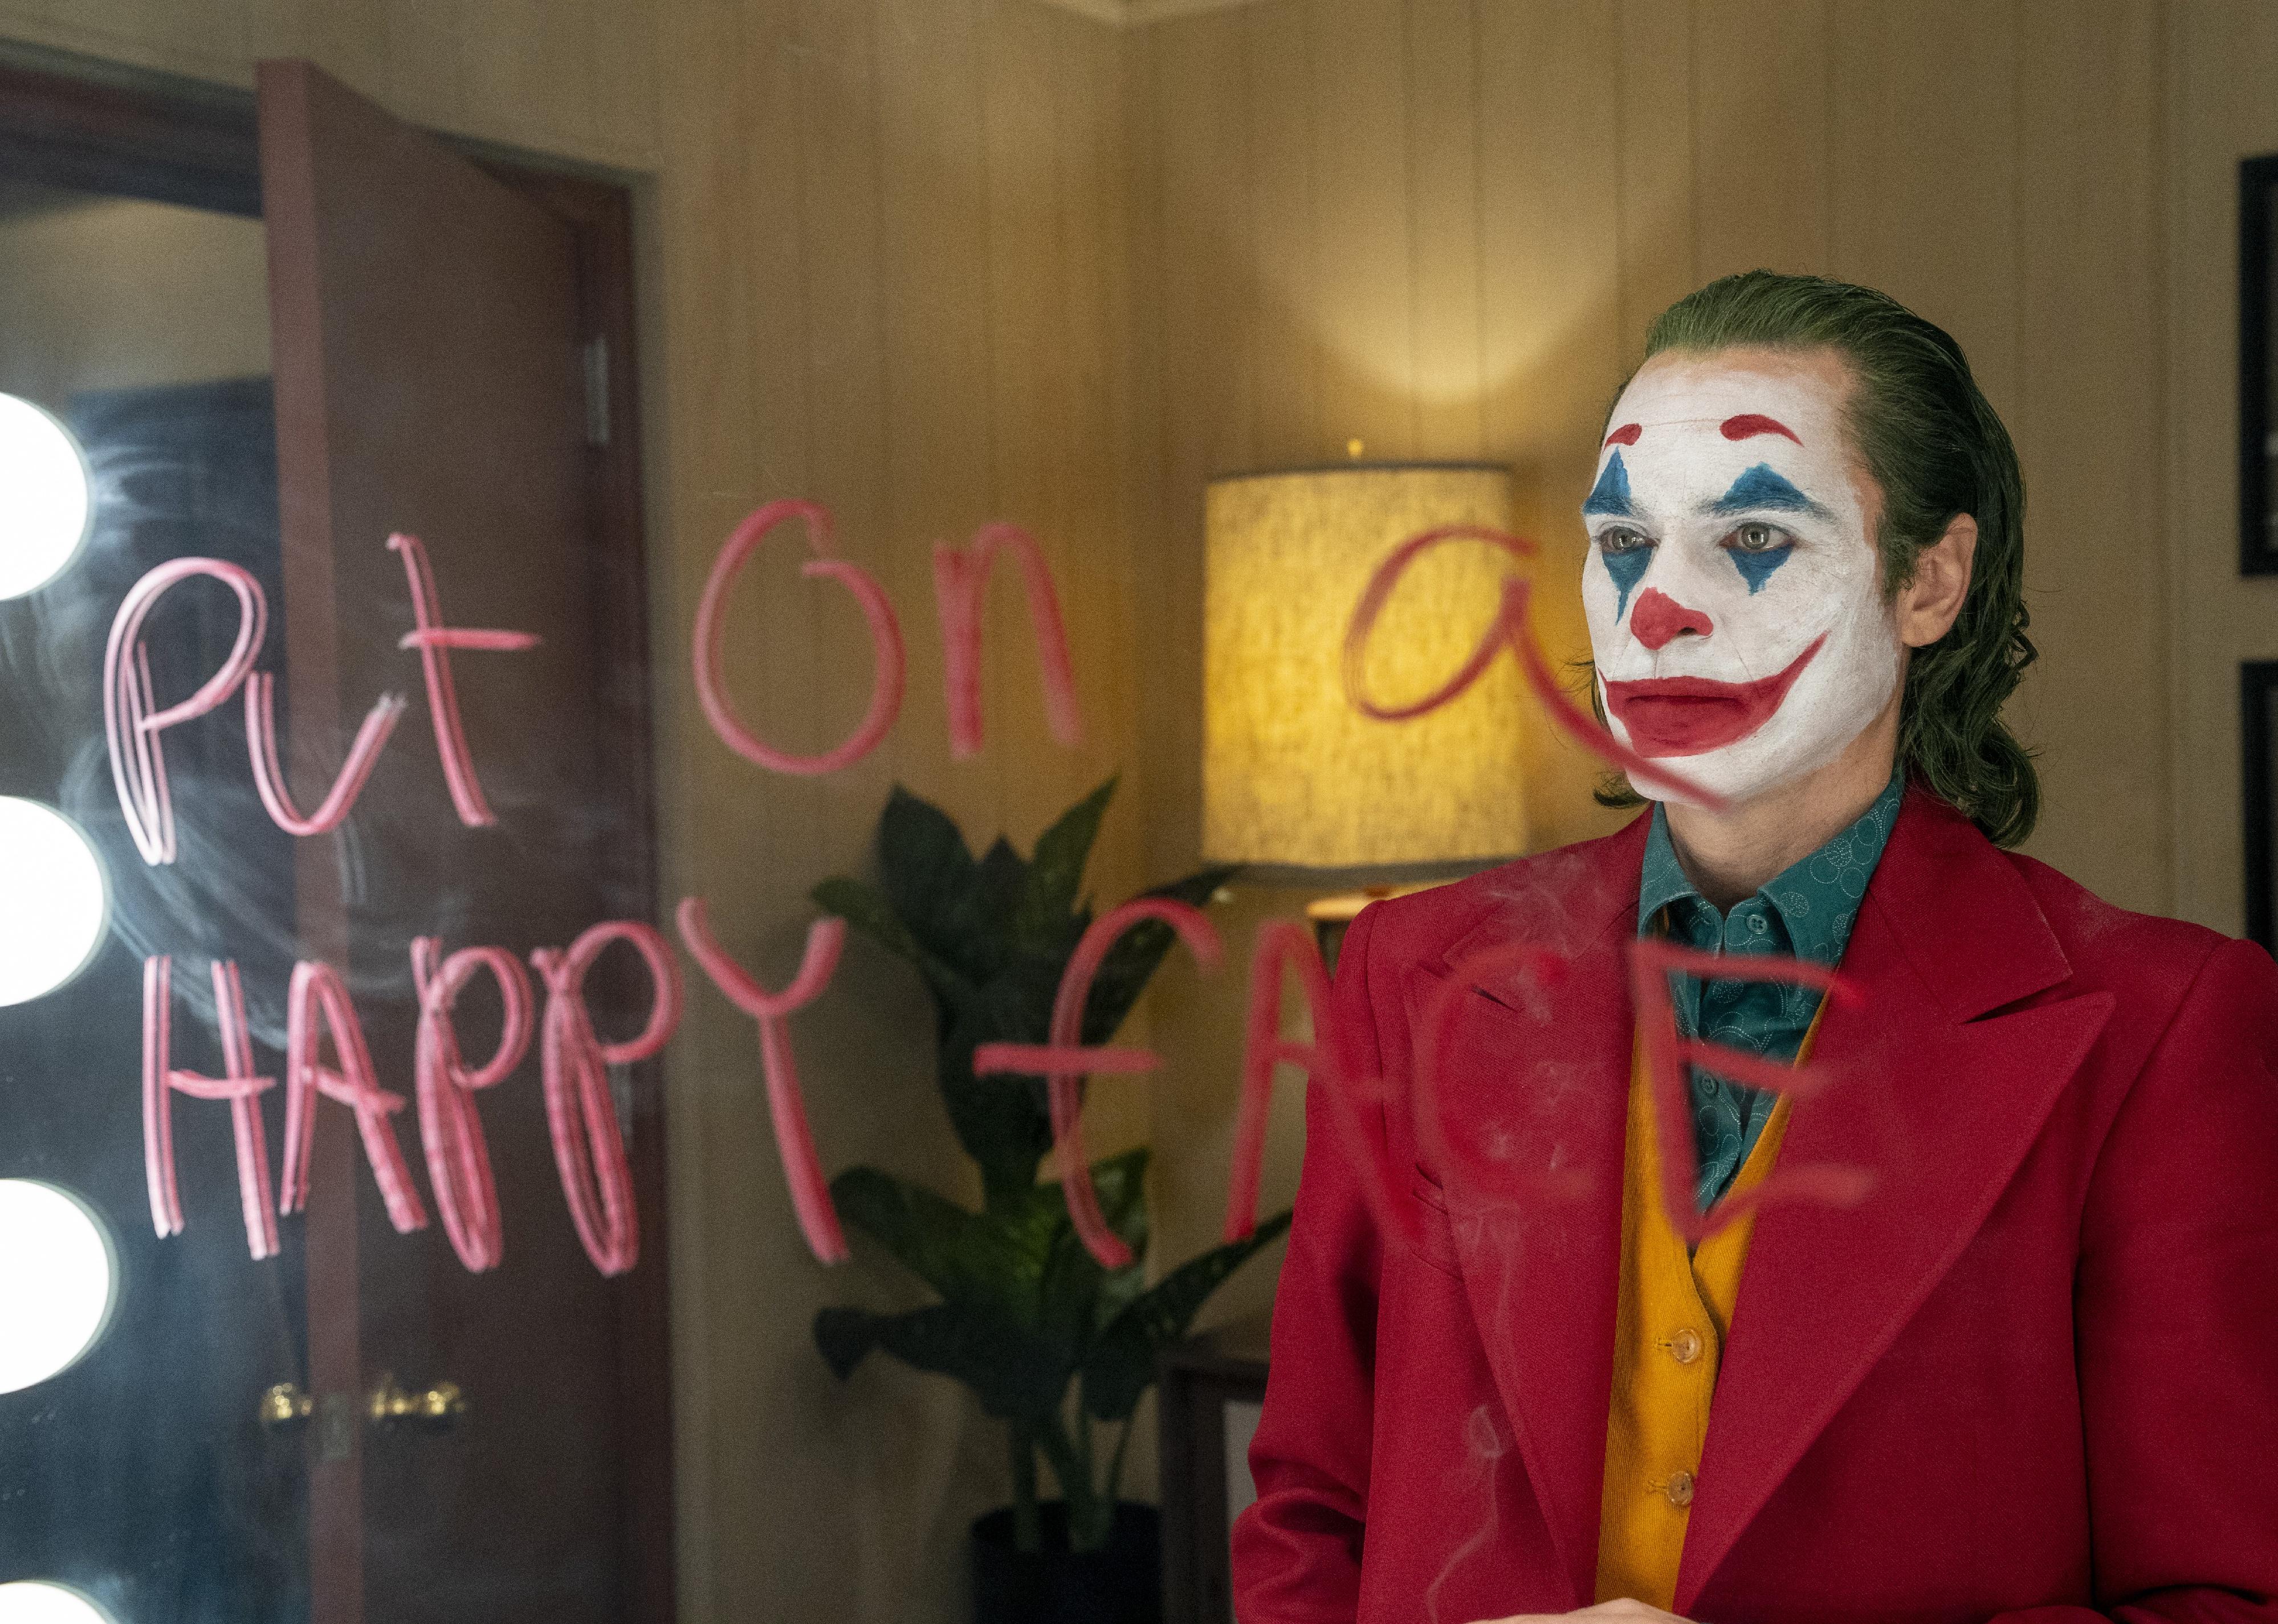 Joaquin Phoenix with clown makeup on in a red jacket looking in a mirror.